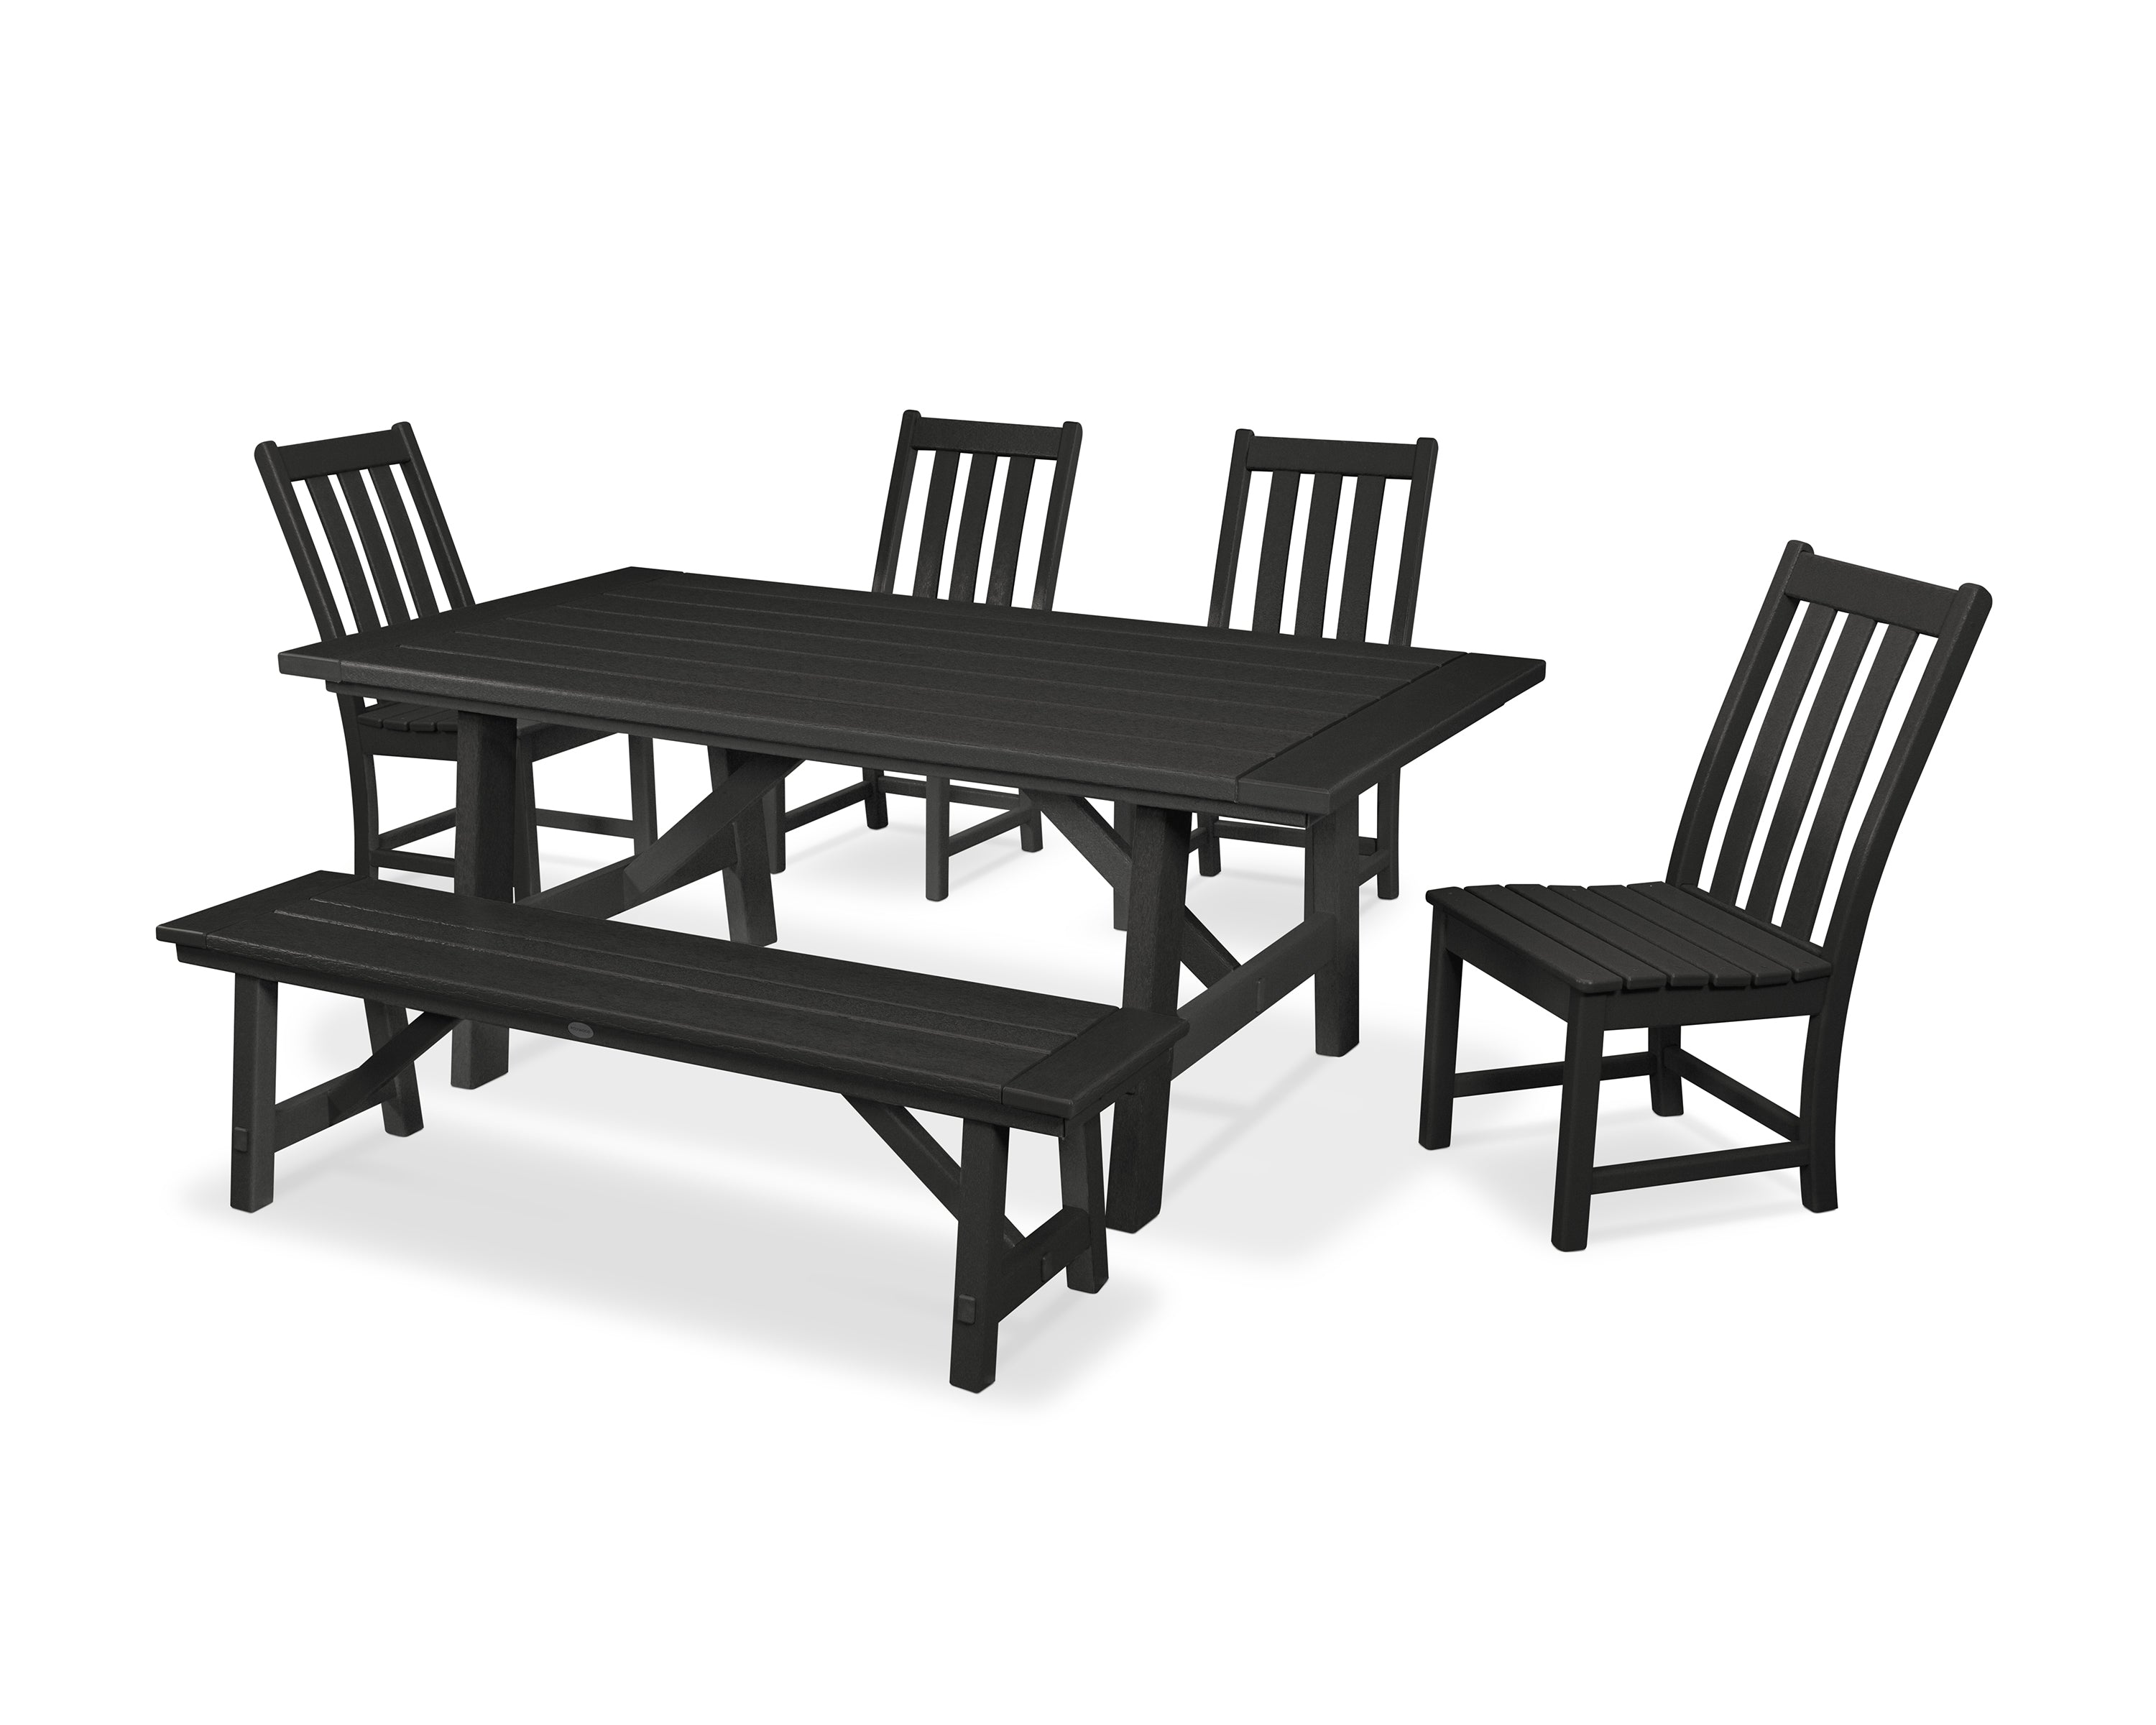 POLYWOOD® Vineyard 6-Piece Rustic Farmhouse Side Chair Dining Set with Bench in Black